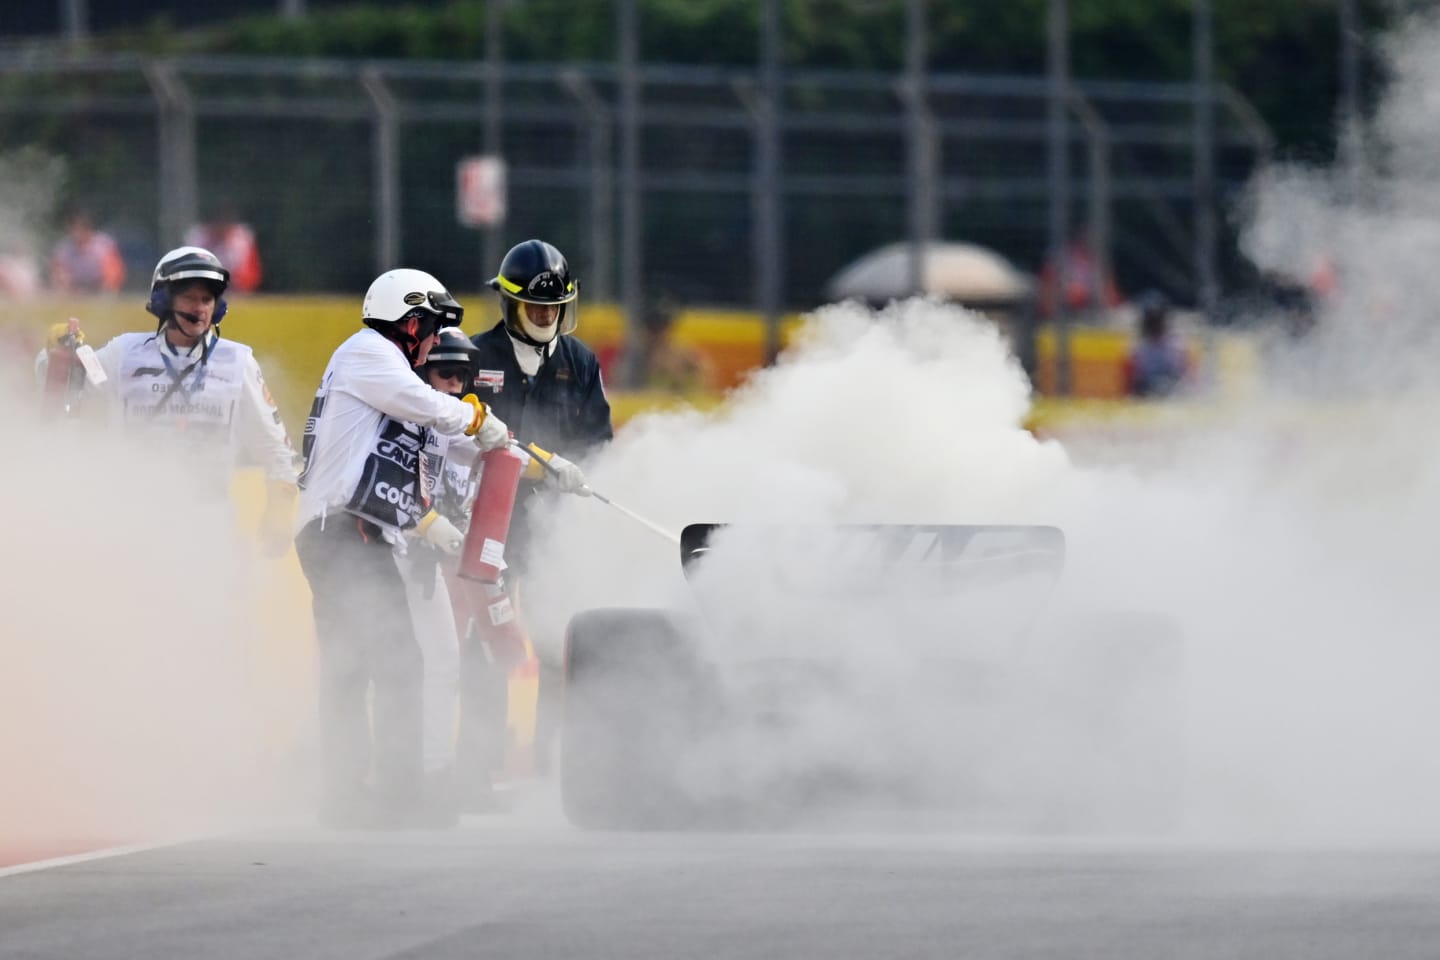 MONTREAL, QUEBEC - JUNE 16: Track marshals use fire extinguishers on the car of Nico Hulkenberg of Germany and Haas F1 during practice ahead of the F1 Grand Prix of Canada at Circuit Gilles Villeneuve on June 16, 2023 in Montreal, Quebec. (Photo by Dan Mullan/Getty Images)